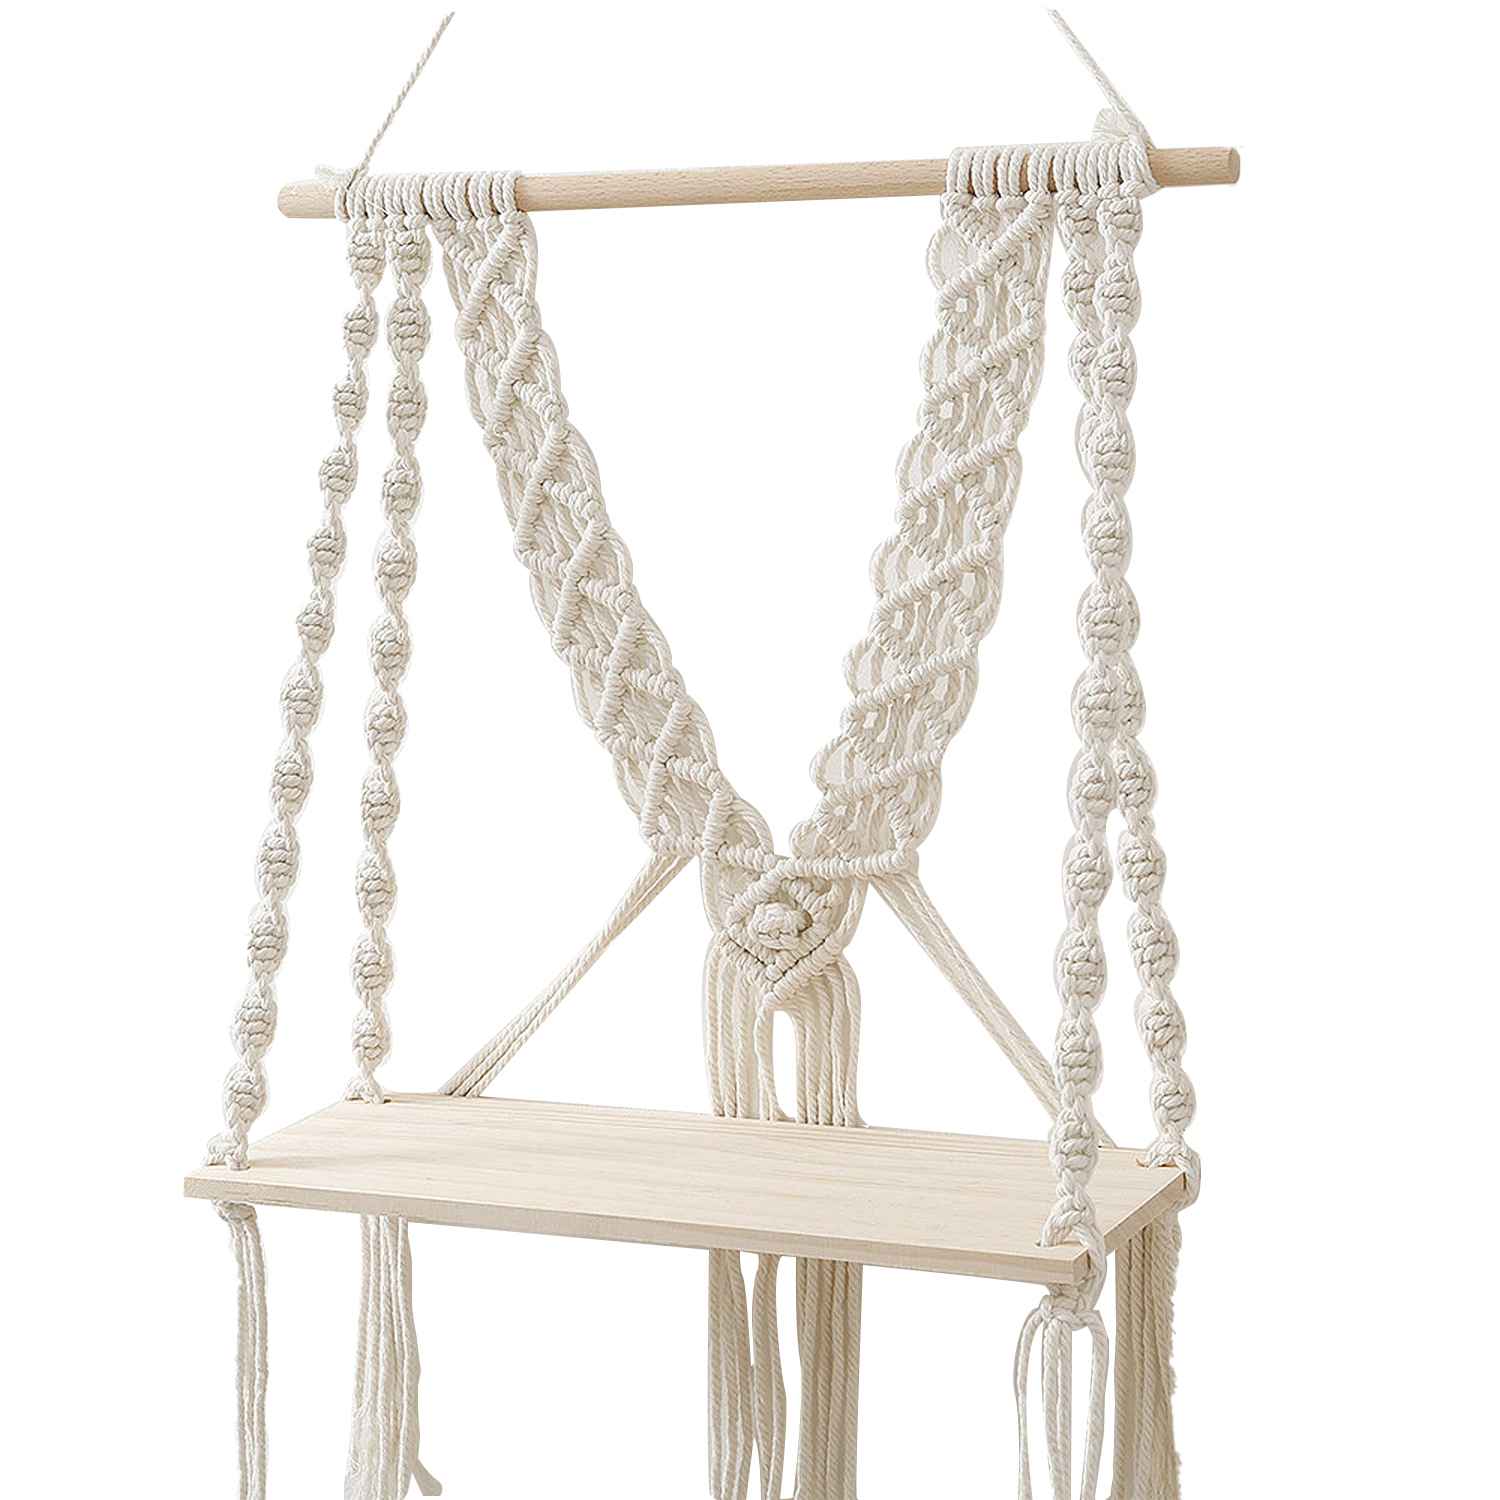 Kaahira Single Seater Stong Luxurious Handwoven Swing Chair in White Color